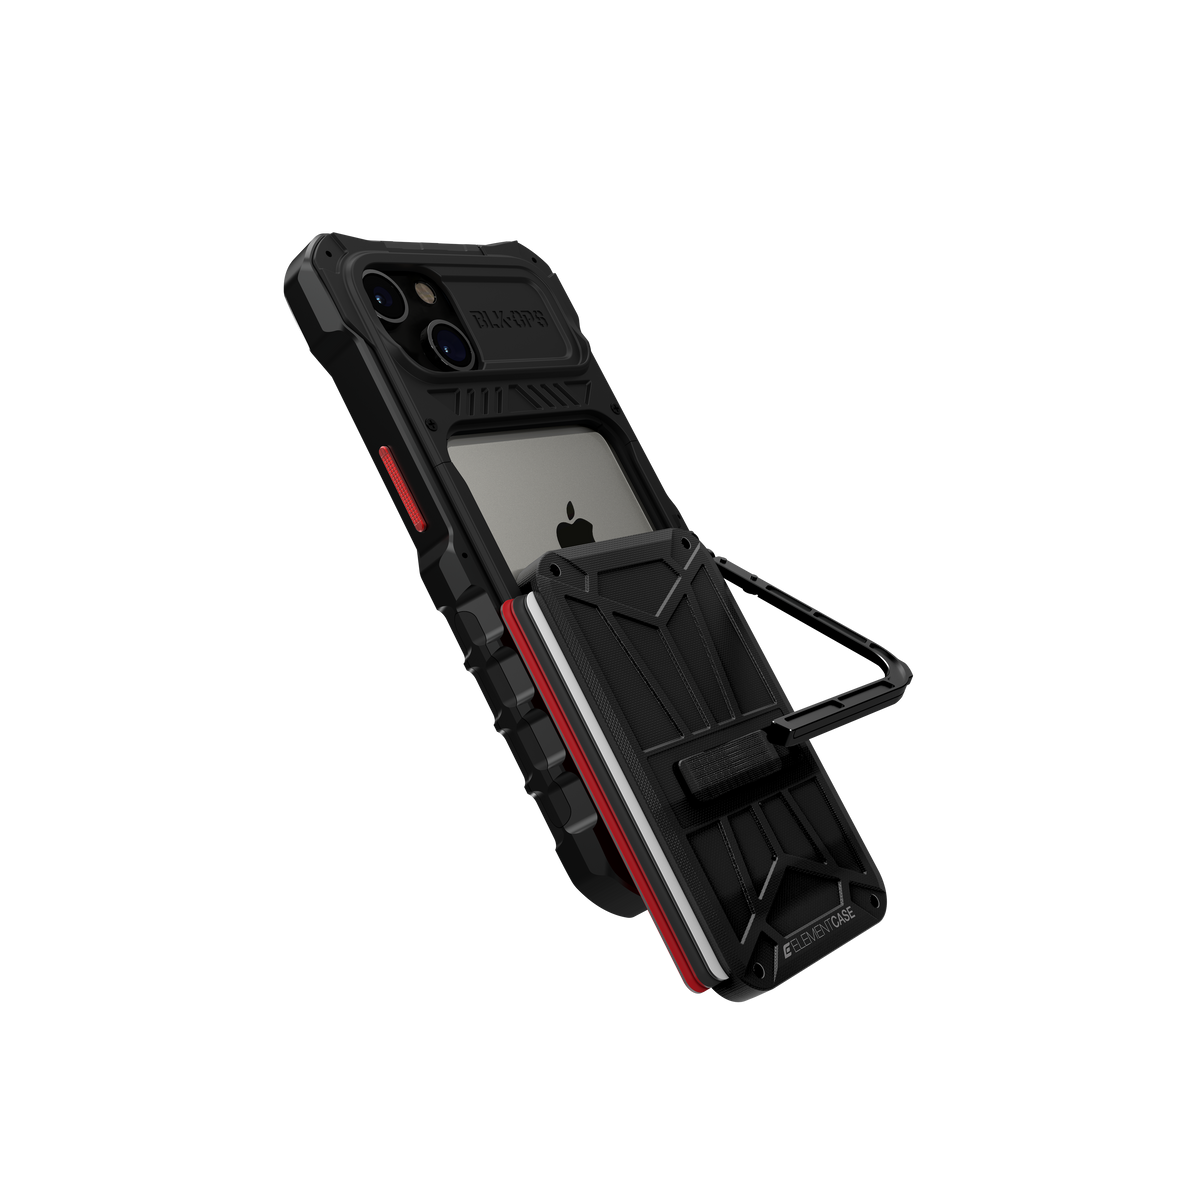 Special OPS X5, iPhone 14 Series